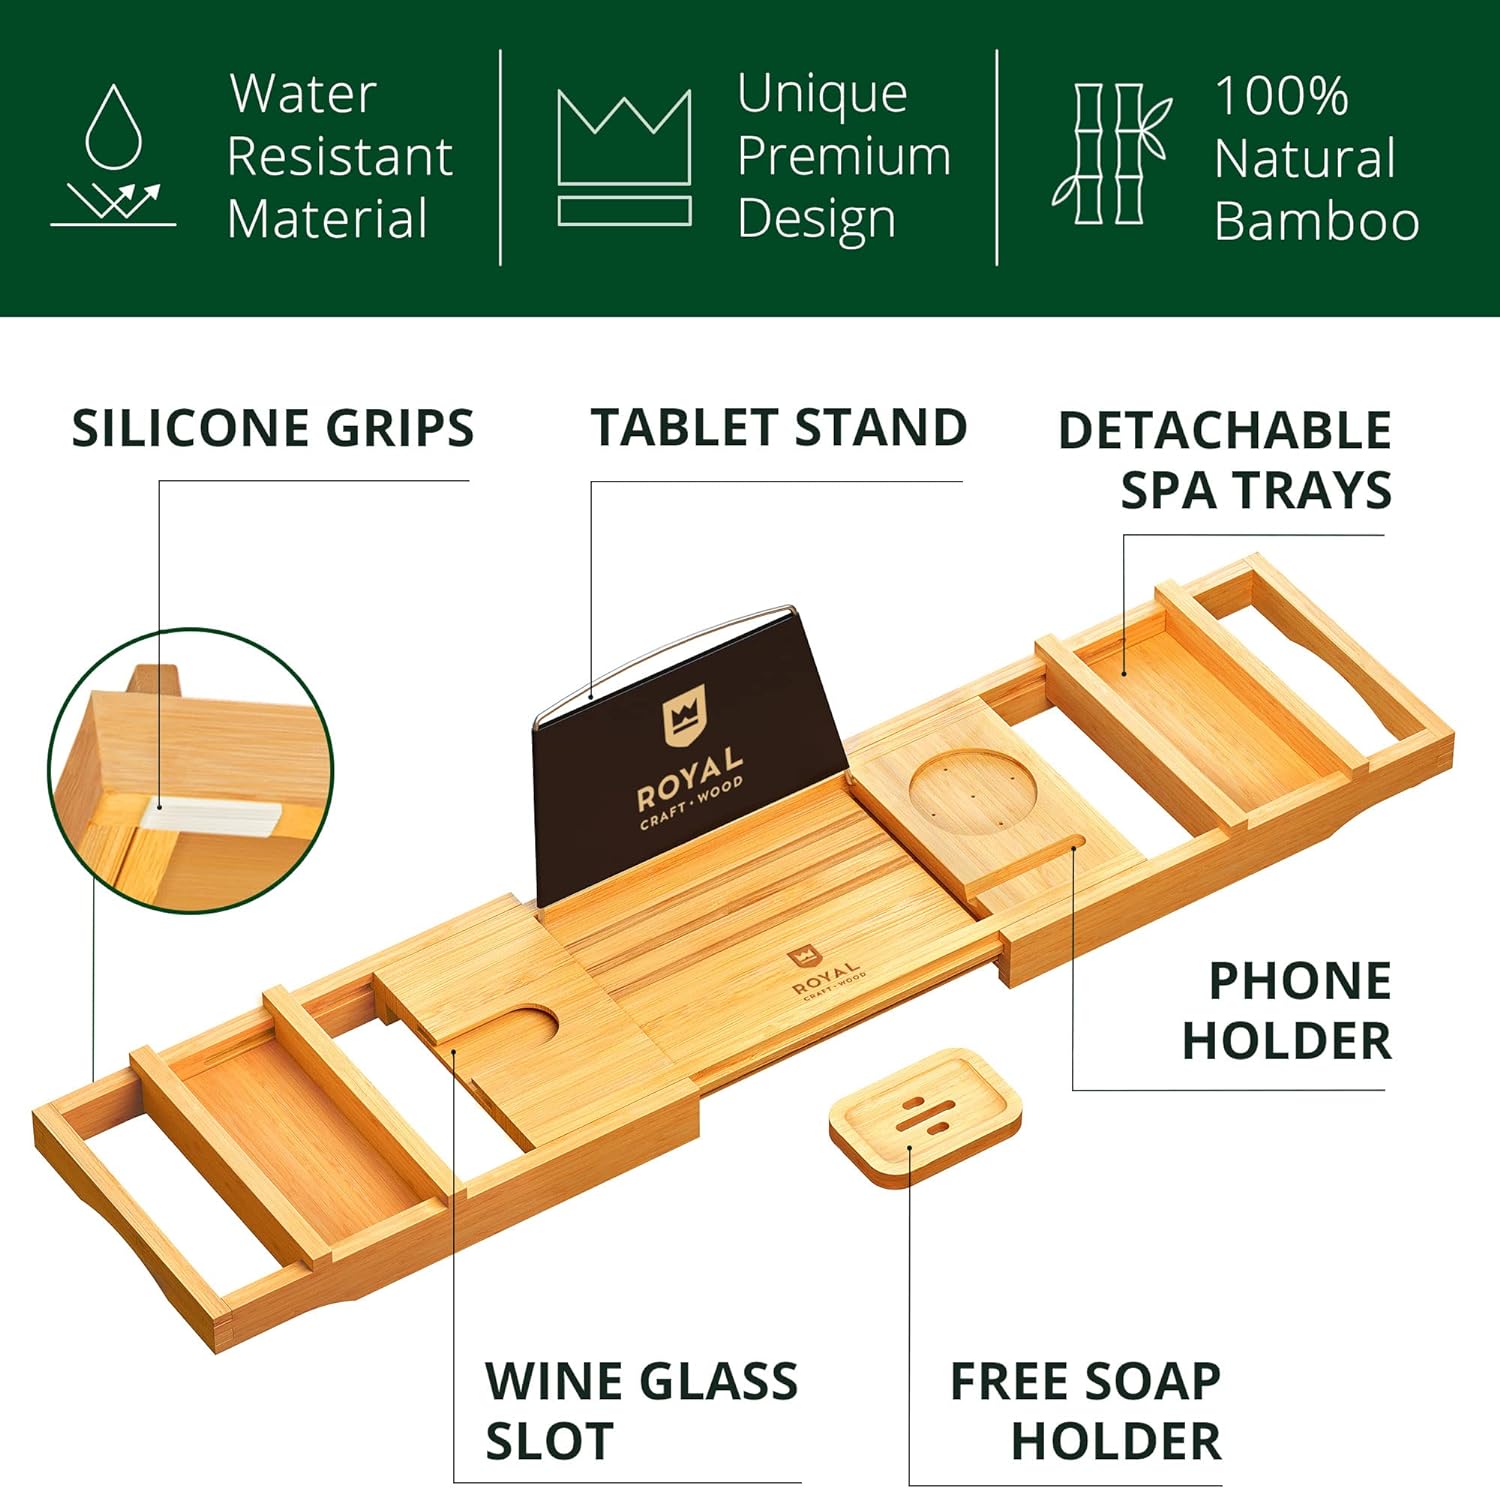 ROYAL CRAFT WOOD Luxury Bathtub Caddy Tray, One or Two Person Bath and Bed Tray, Bonus Free Soap Holder (Natural Bamboo Color) - image 3 of 10